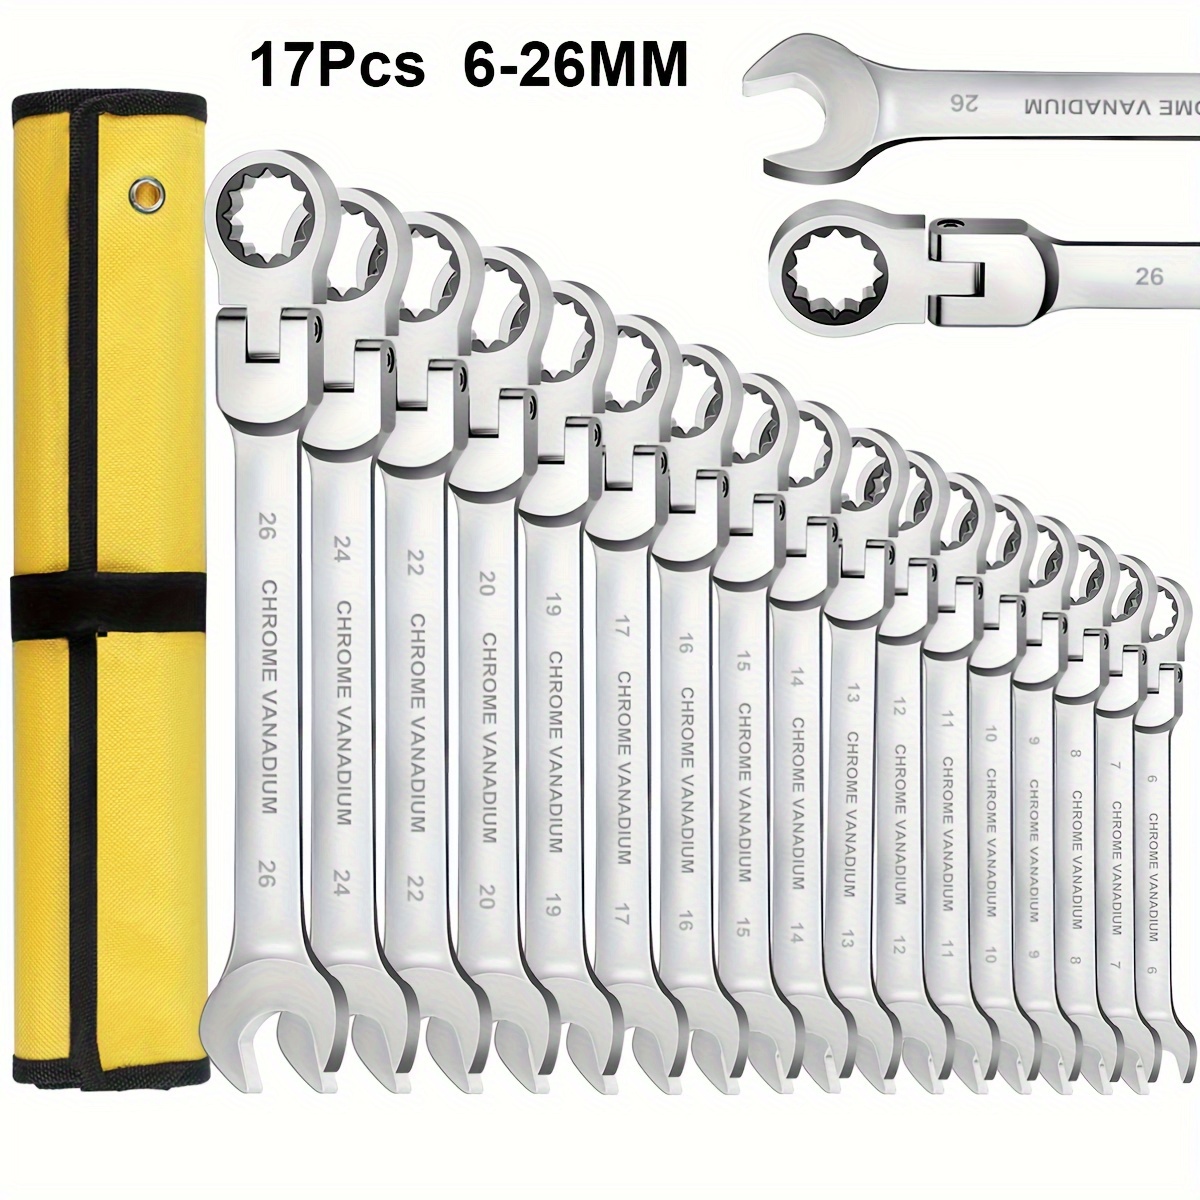 

17pcs, Flex-head Ratchet Wrench Set, 6-26mm, 72 Teeth, Cr-v Constructed Combination Ended Span Kit With With Rolling Pouch